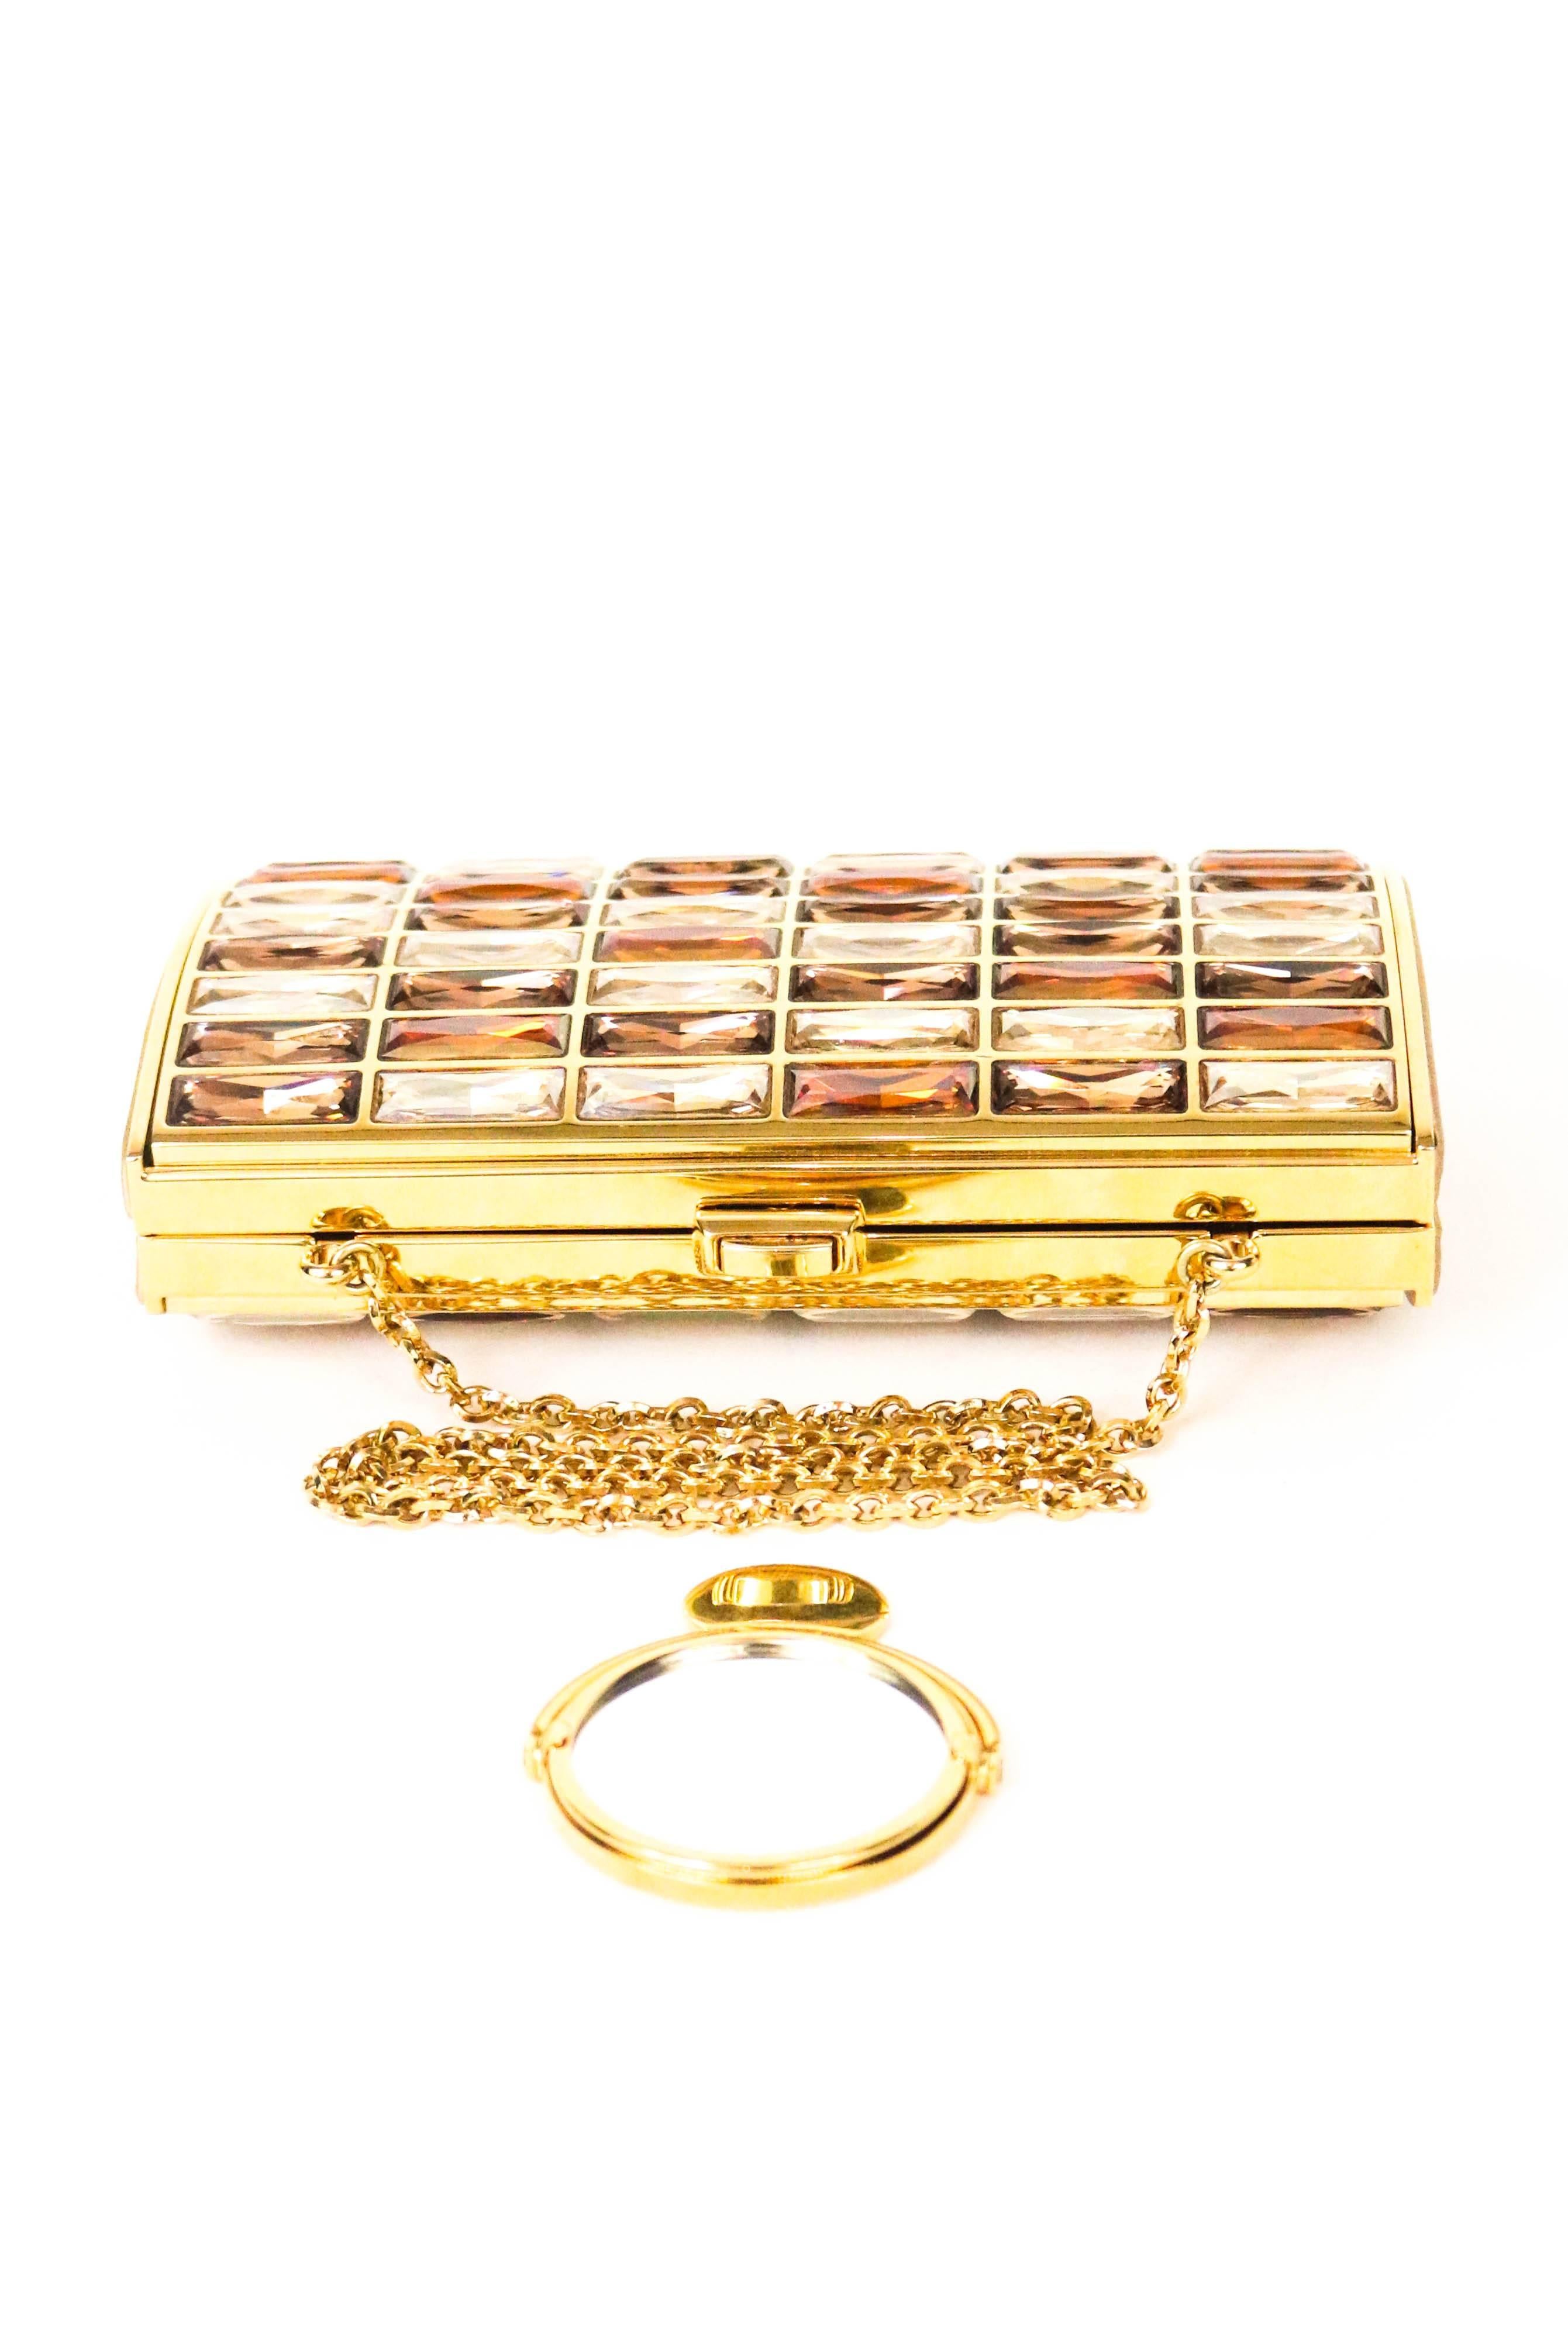 Offered is an authentic and stunning piece by Judith Leiber, the Goddess clutch in bronze and gold. A beautiful gold tone frame trimmed with shimmering crystals in gold, bronze, and clear.  Supple gold leather lining.  Comes with signature small